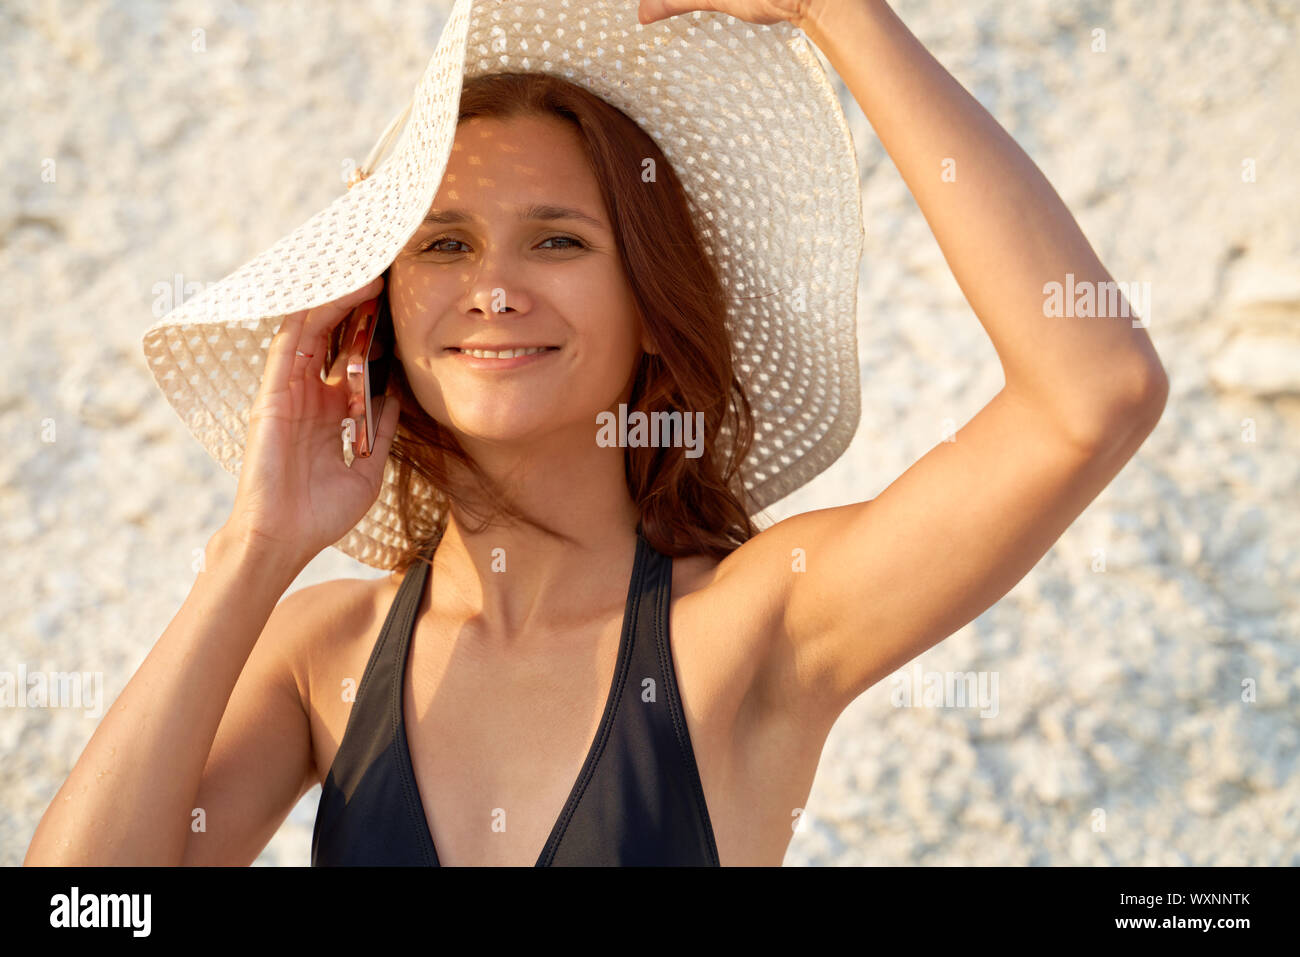 A Brunette Bikini Model With Small Breasts Posing On A Beach. Sexy Girl In  Bikini Posing At Sunset Against Blue Water Stock Photo, Picture and Royalty  Free Image. Image 31481794.